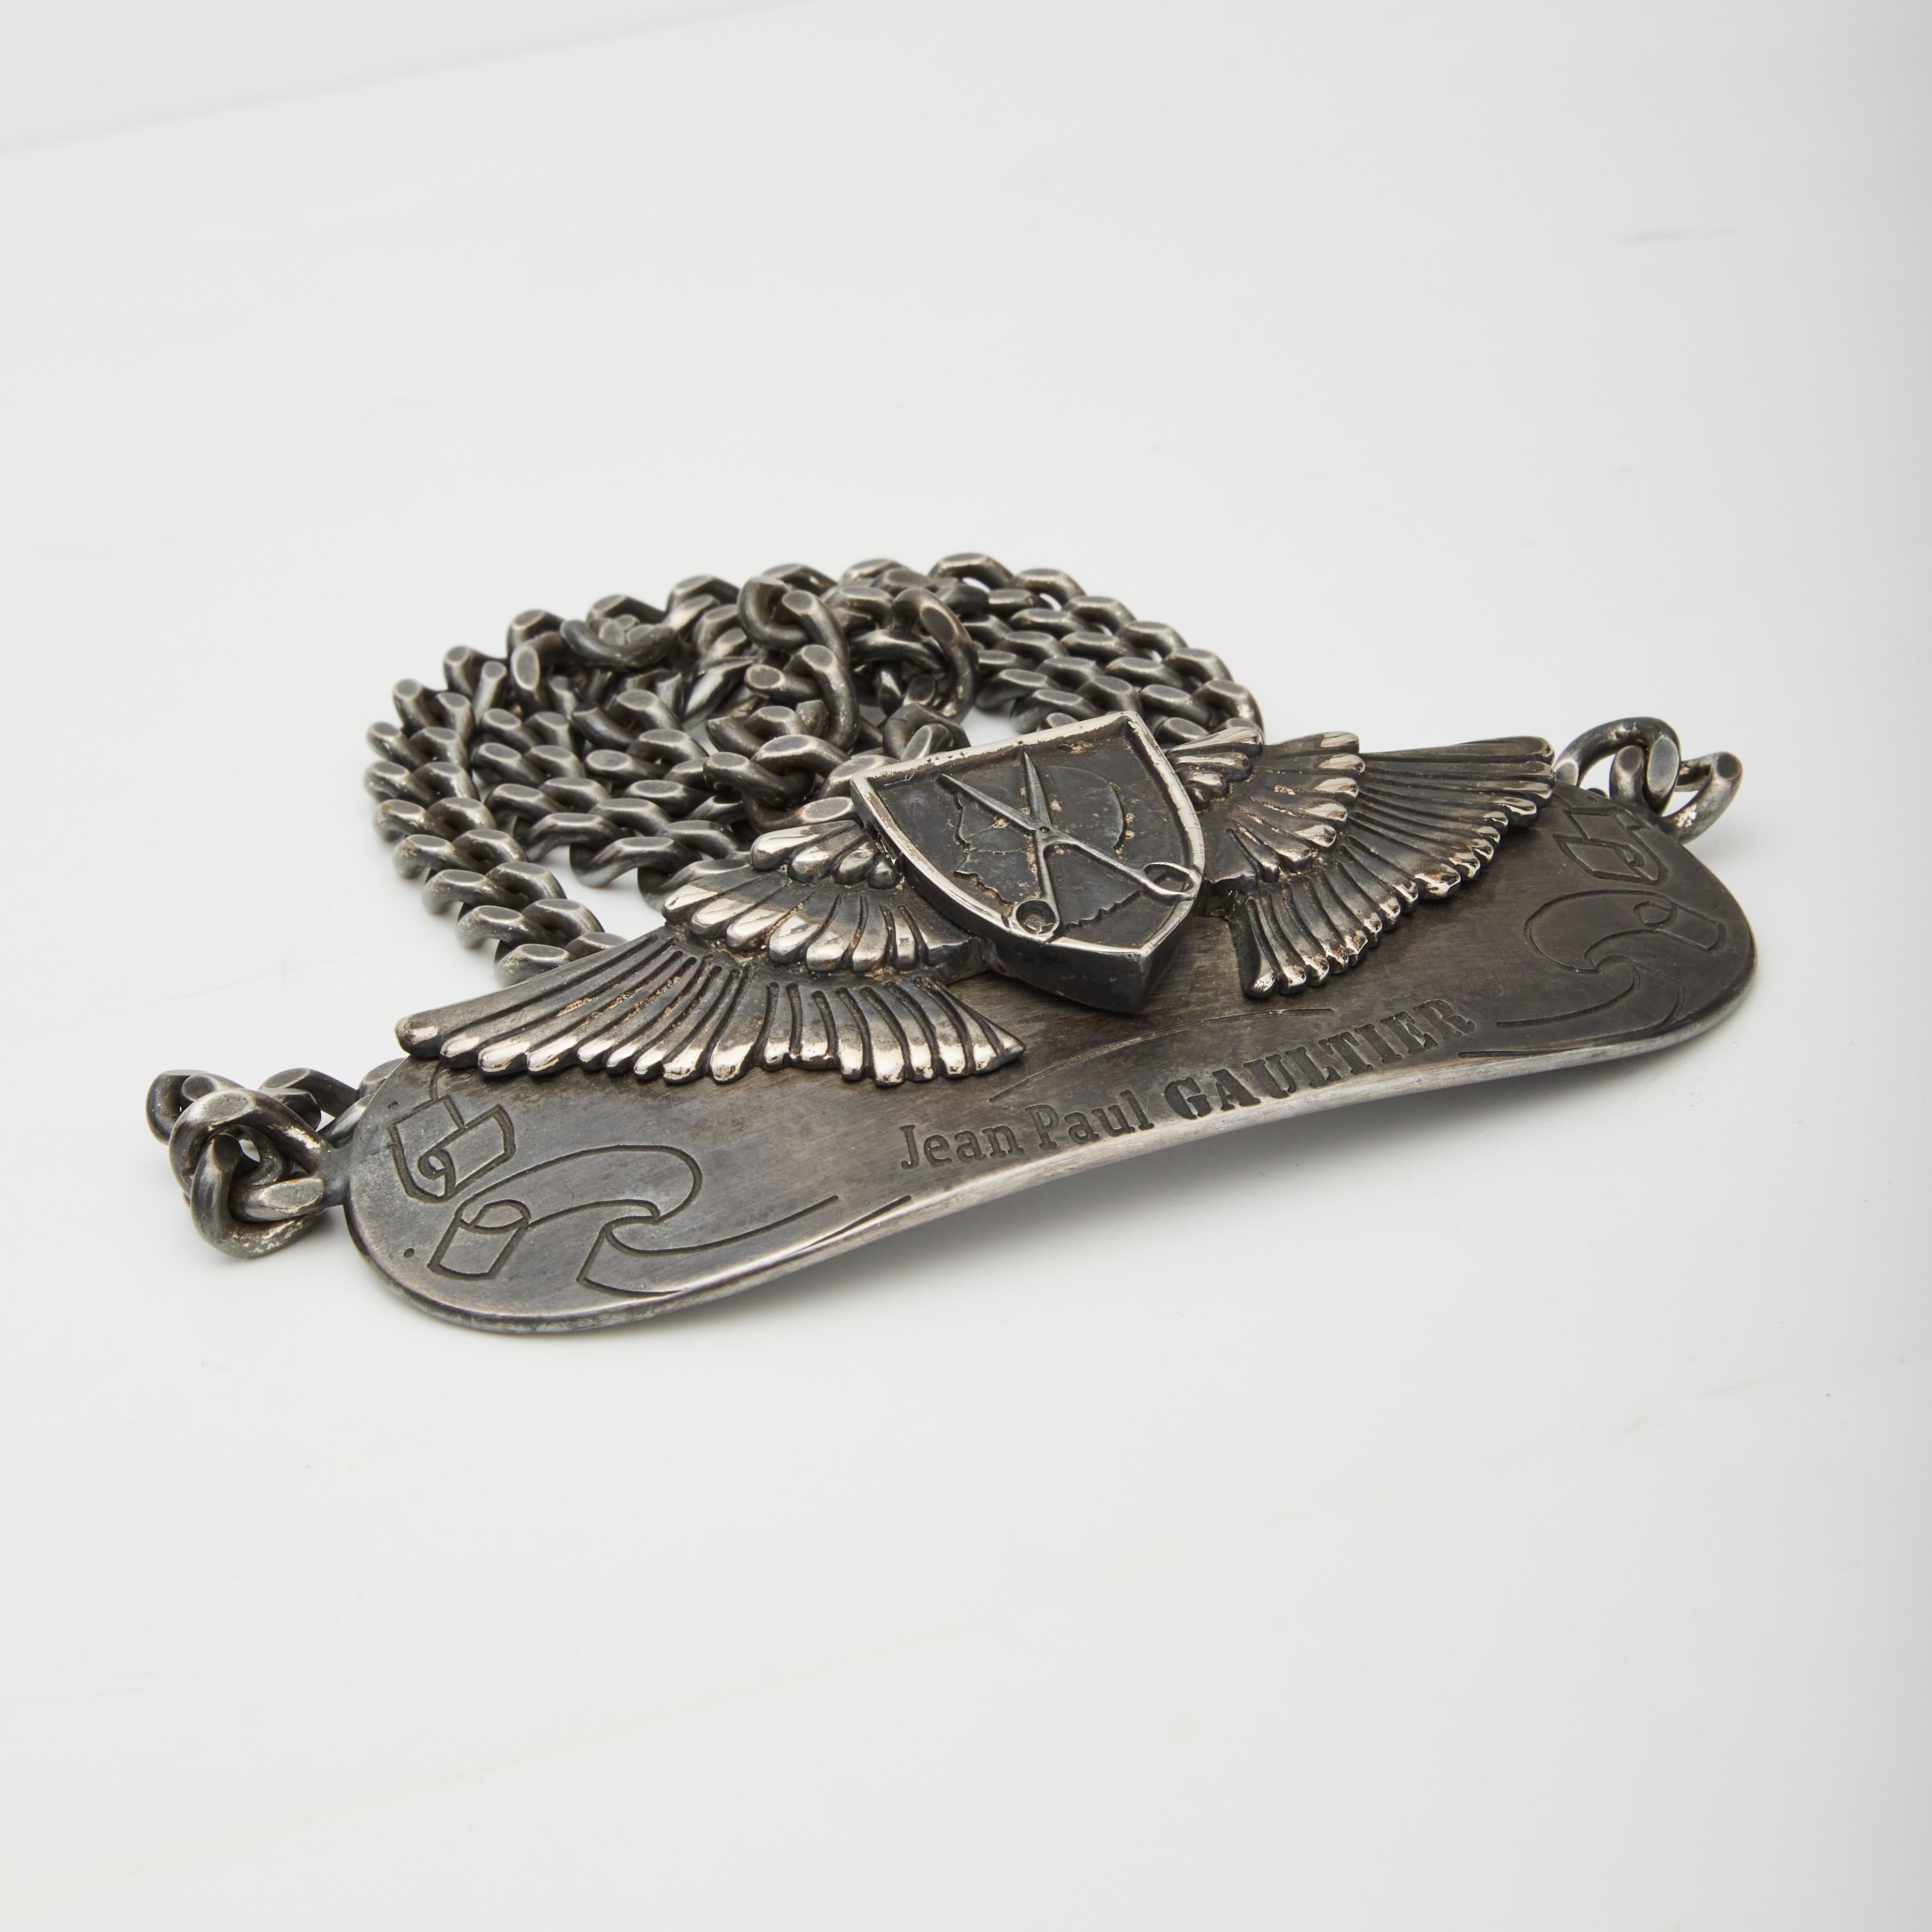 This belt by Jean Paul Gaultier features an antiqued silver tone color, a curb chain, a 3-D “buckle